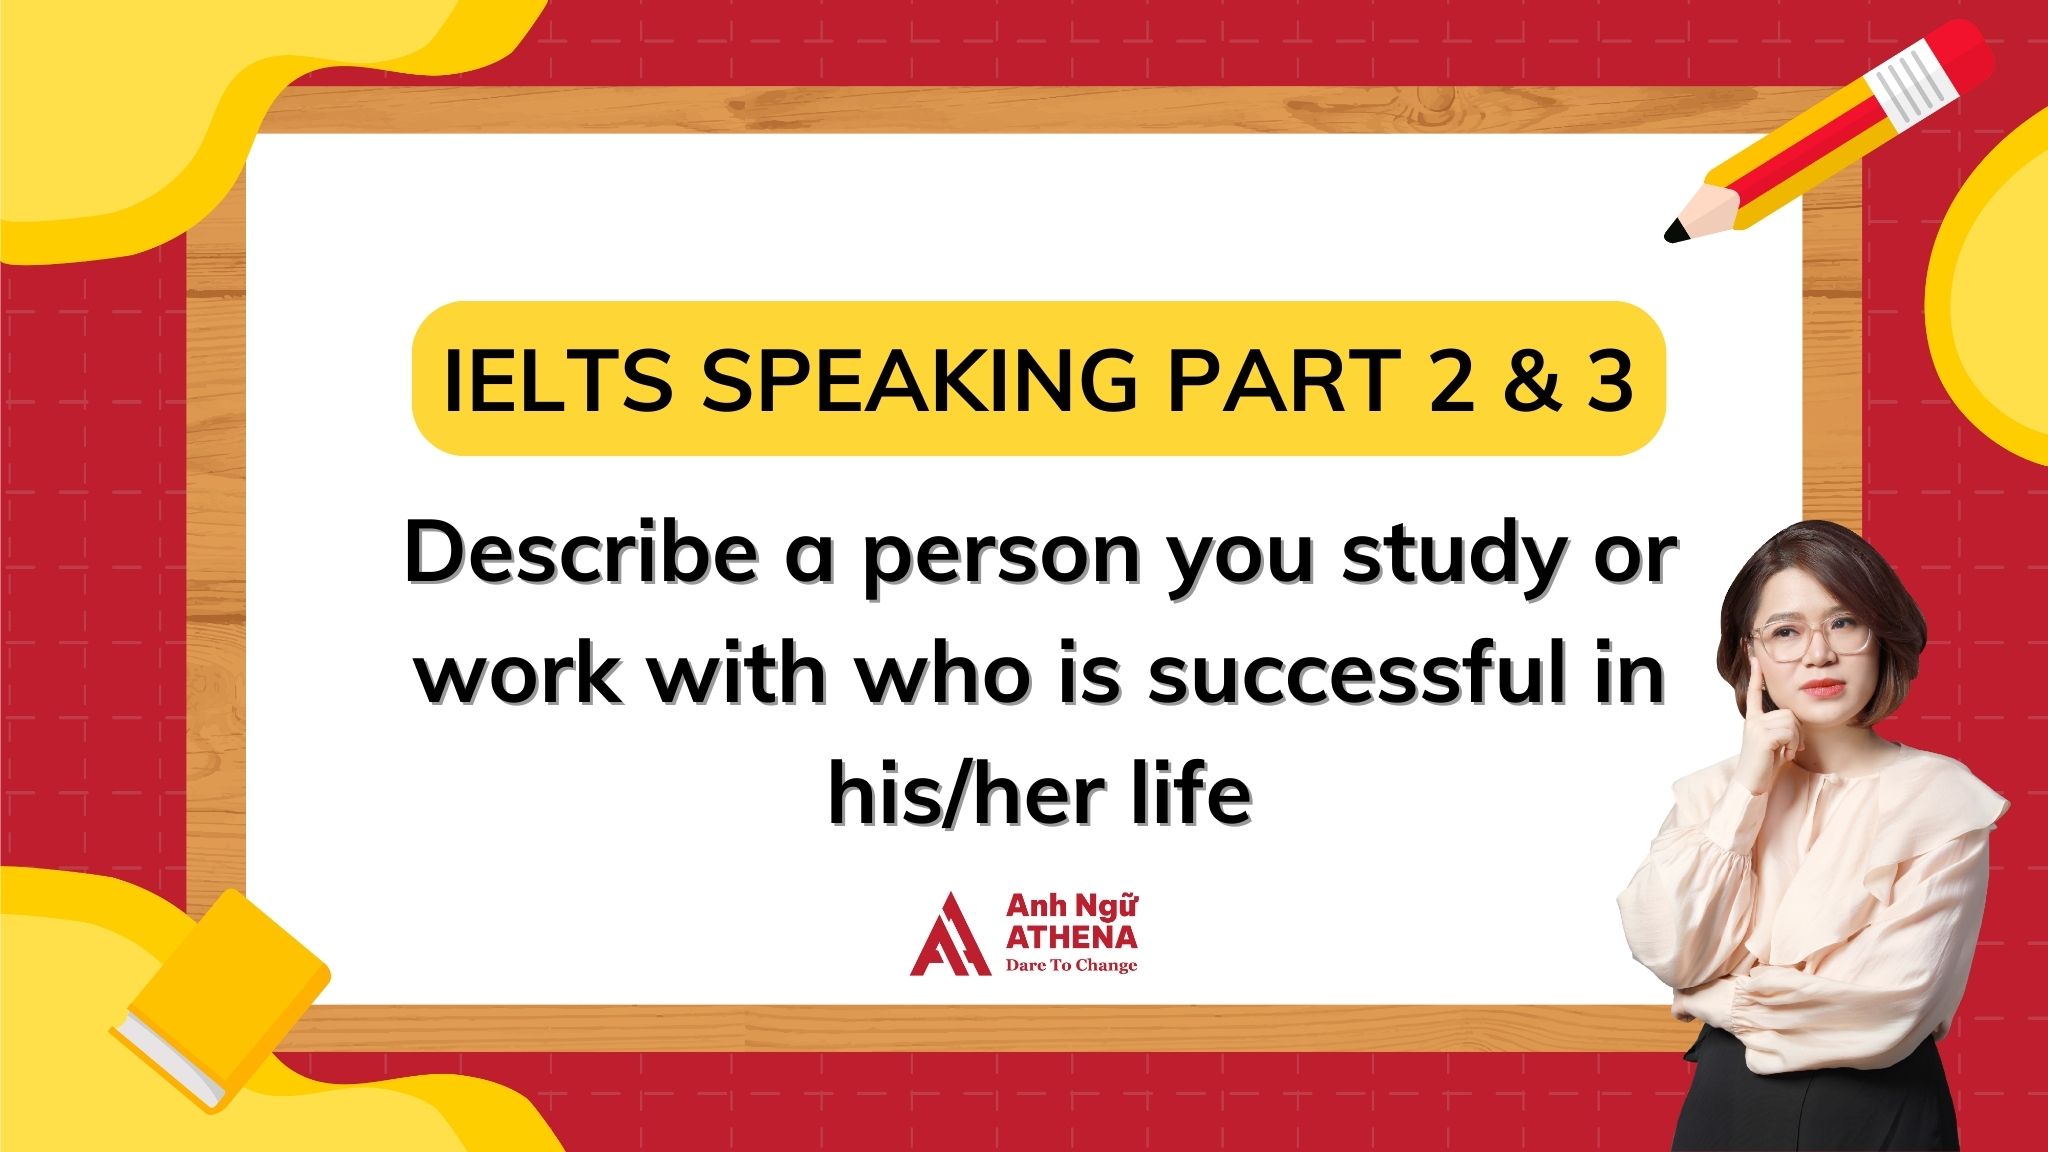 BÀI MẪU IELTS SPEAKING PART 2 & 3 - TOPIC: Describe a person you study or work with who is successful in his/her life 